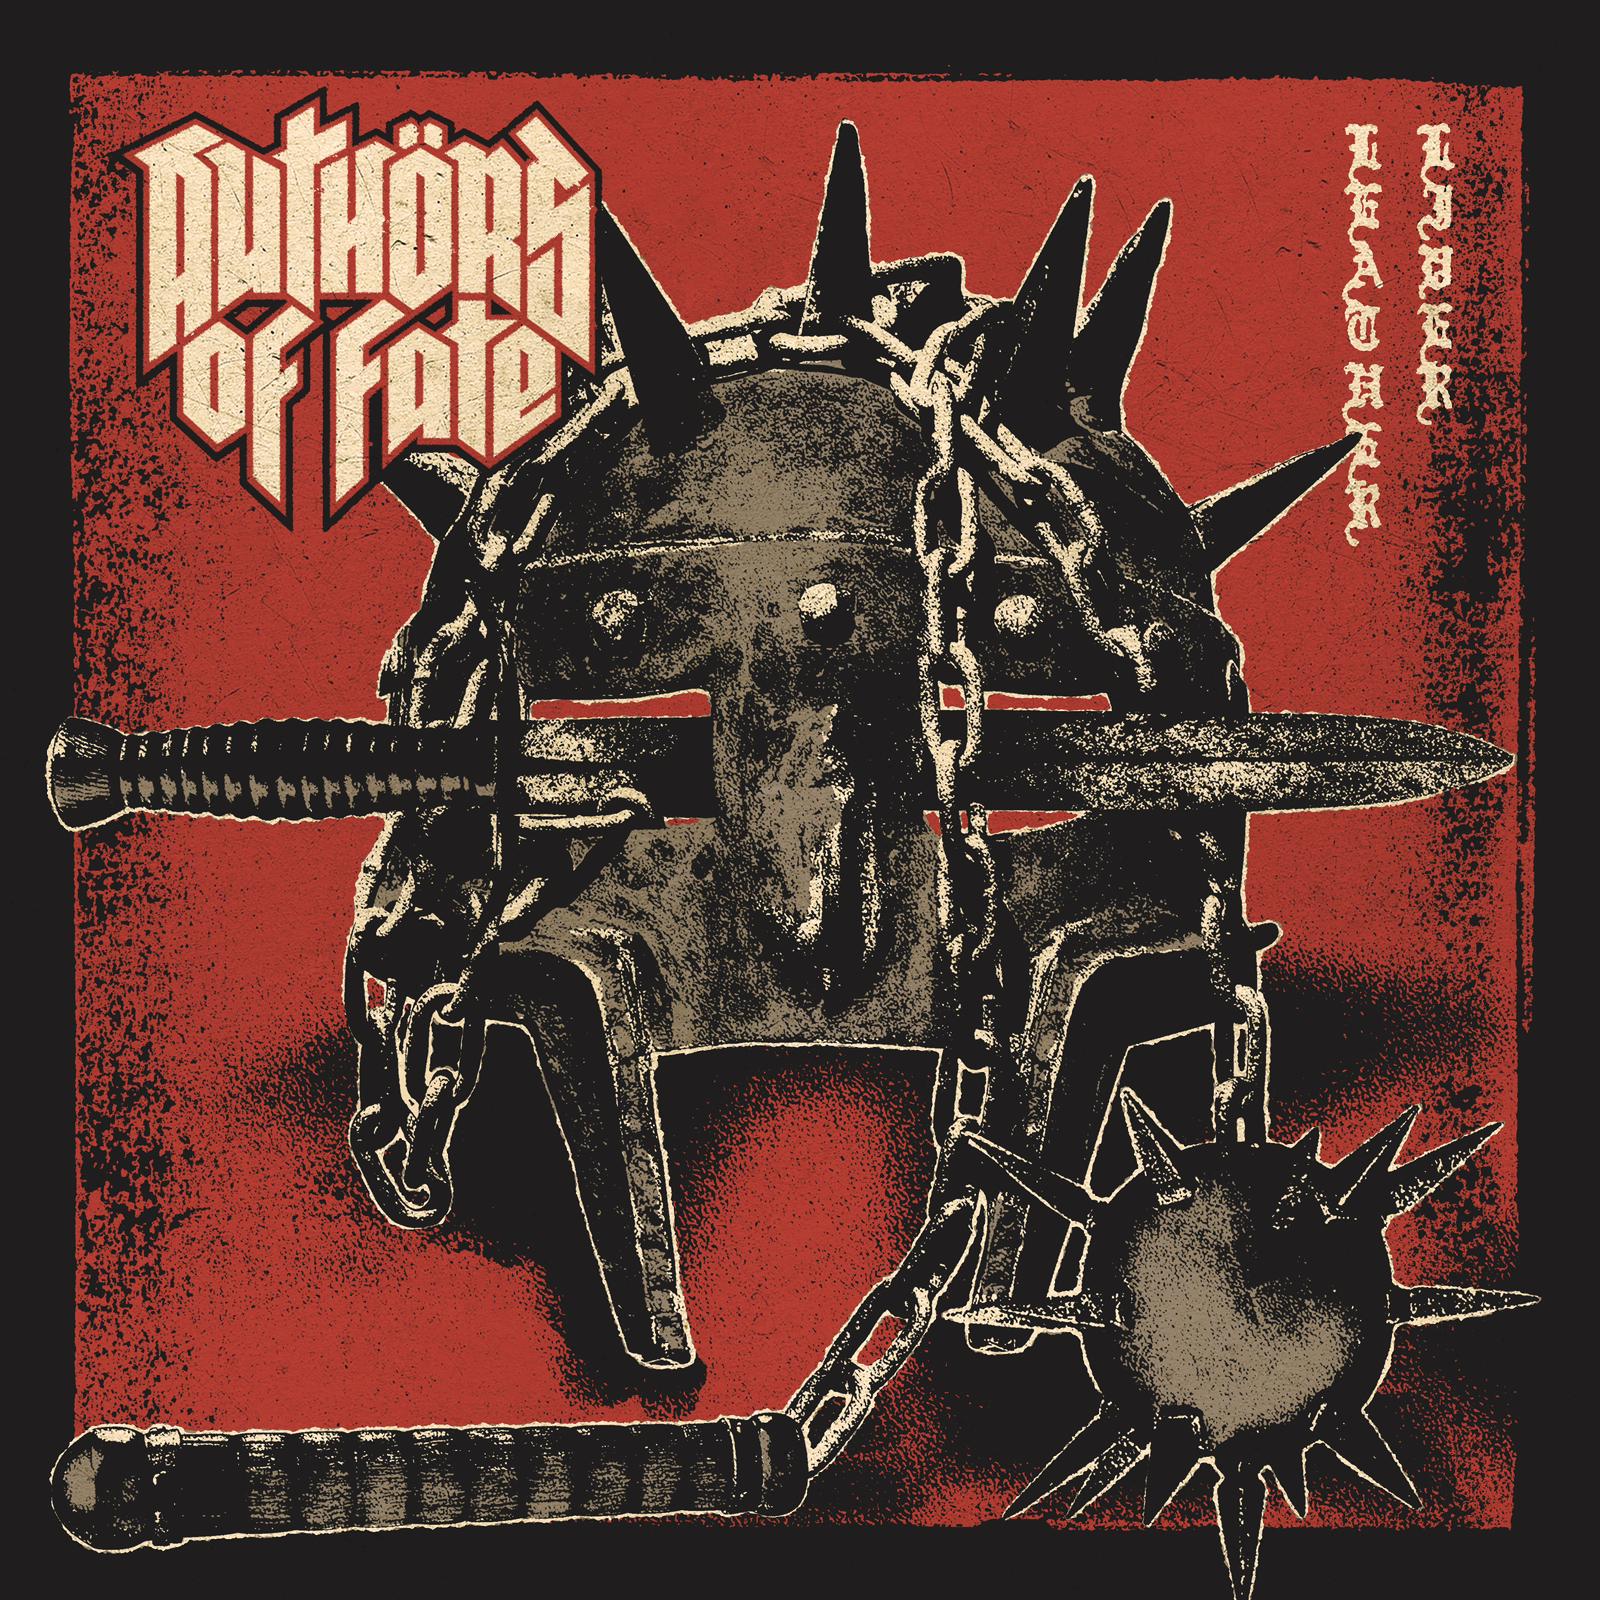 Authors of Fate "Leather Liver" single artwork